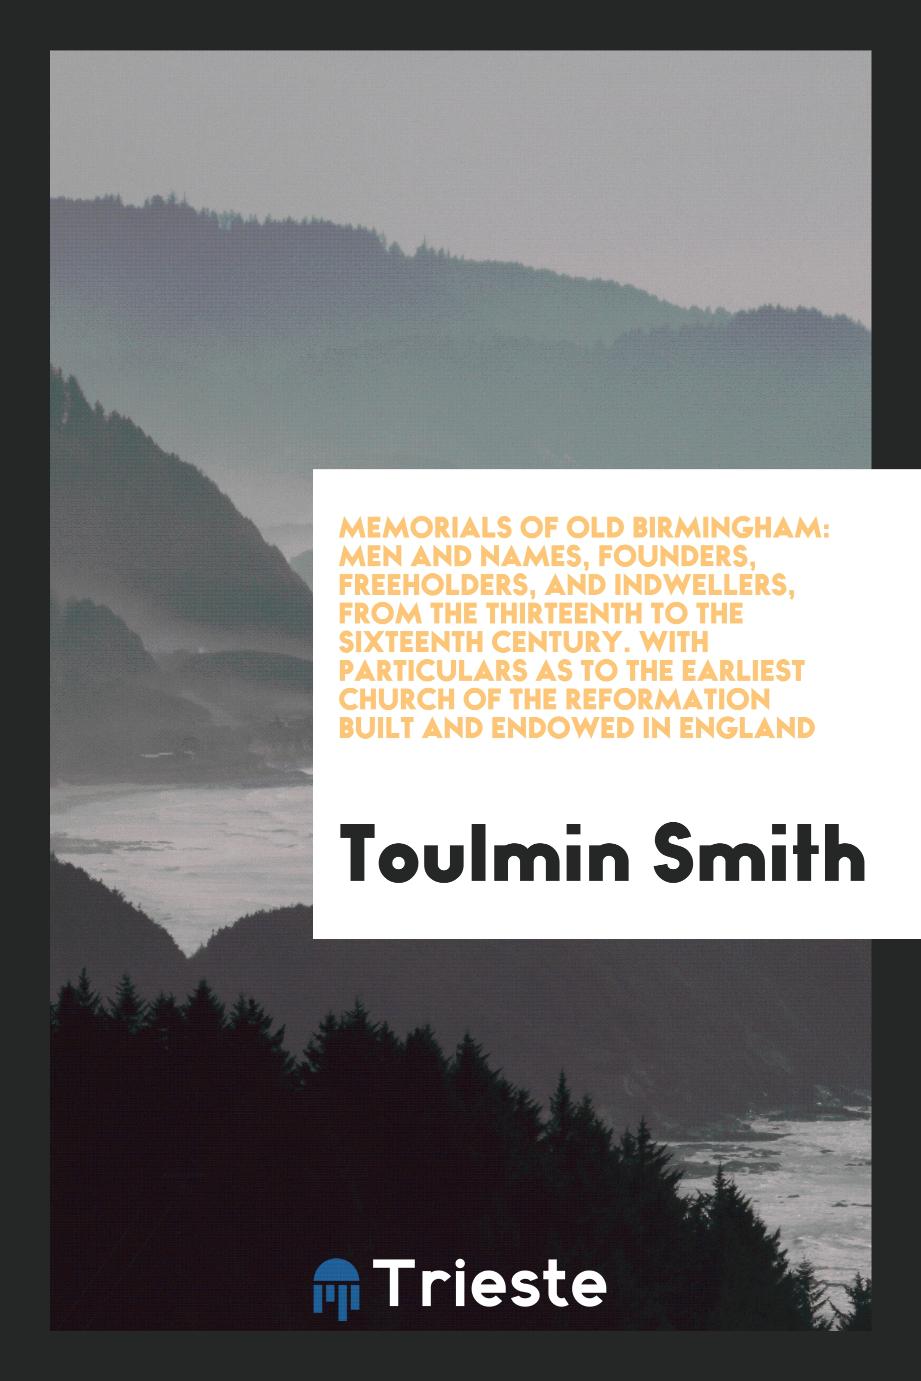 Memorials of Old Birmingham: Men and Names, Founders, Freeholders, and Indwellers, from the Thirteenth to the Sixteenth Century. With Particulars as to the Earliest Church of the Reformation Built and Endowed in England